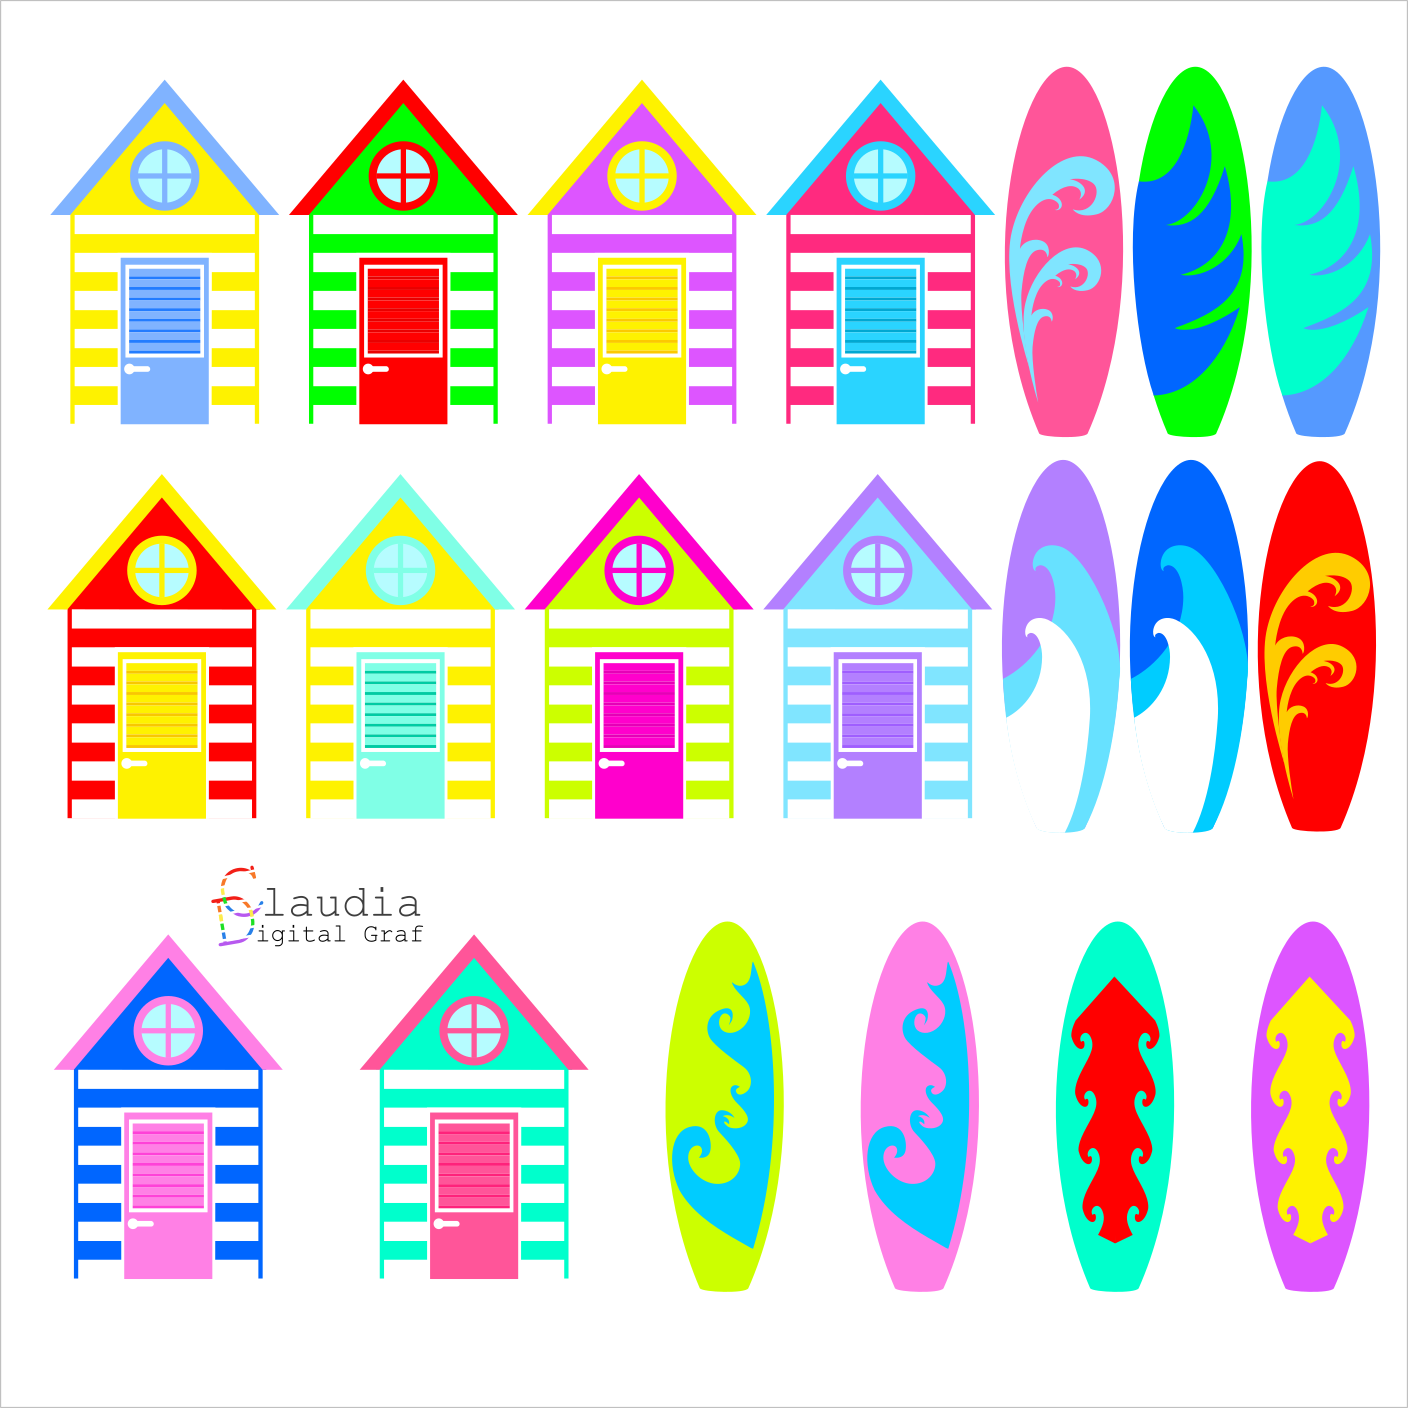 50 Summer beach Clip Art, Beach Hut Nautical, Colorful Surfboards, Vacation Icons, Hot Summer Vacation, Sport in the Waves, Digital PNG preview image.